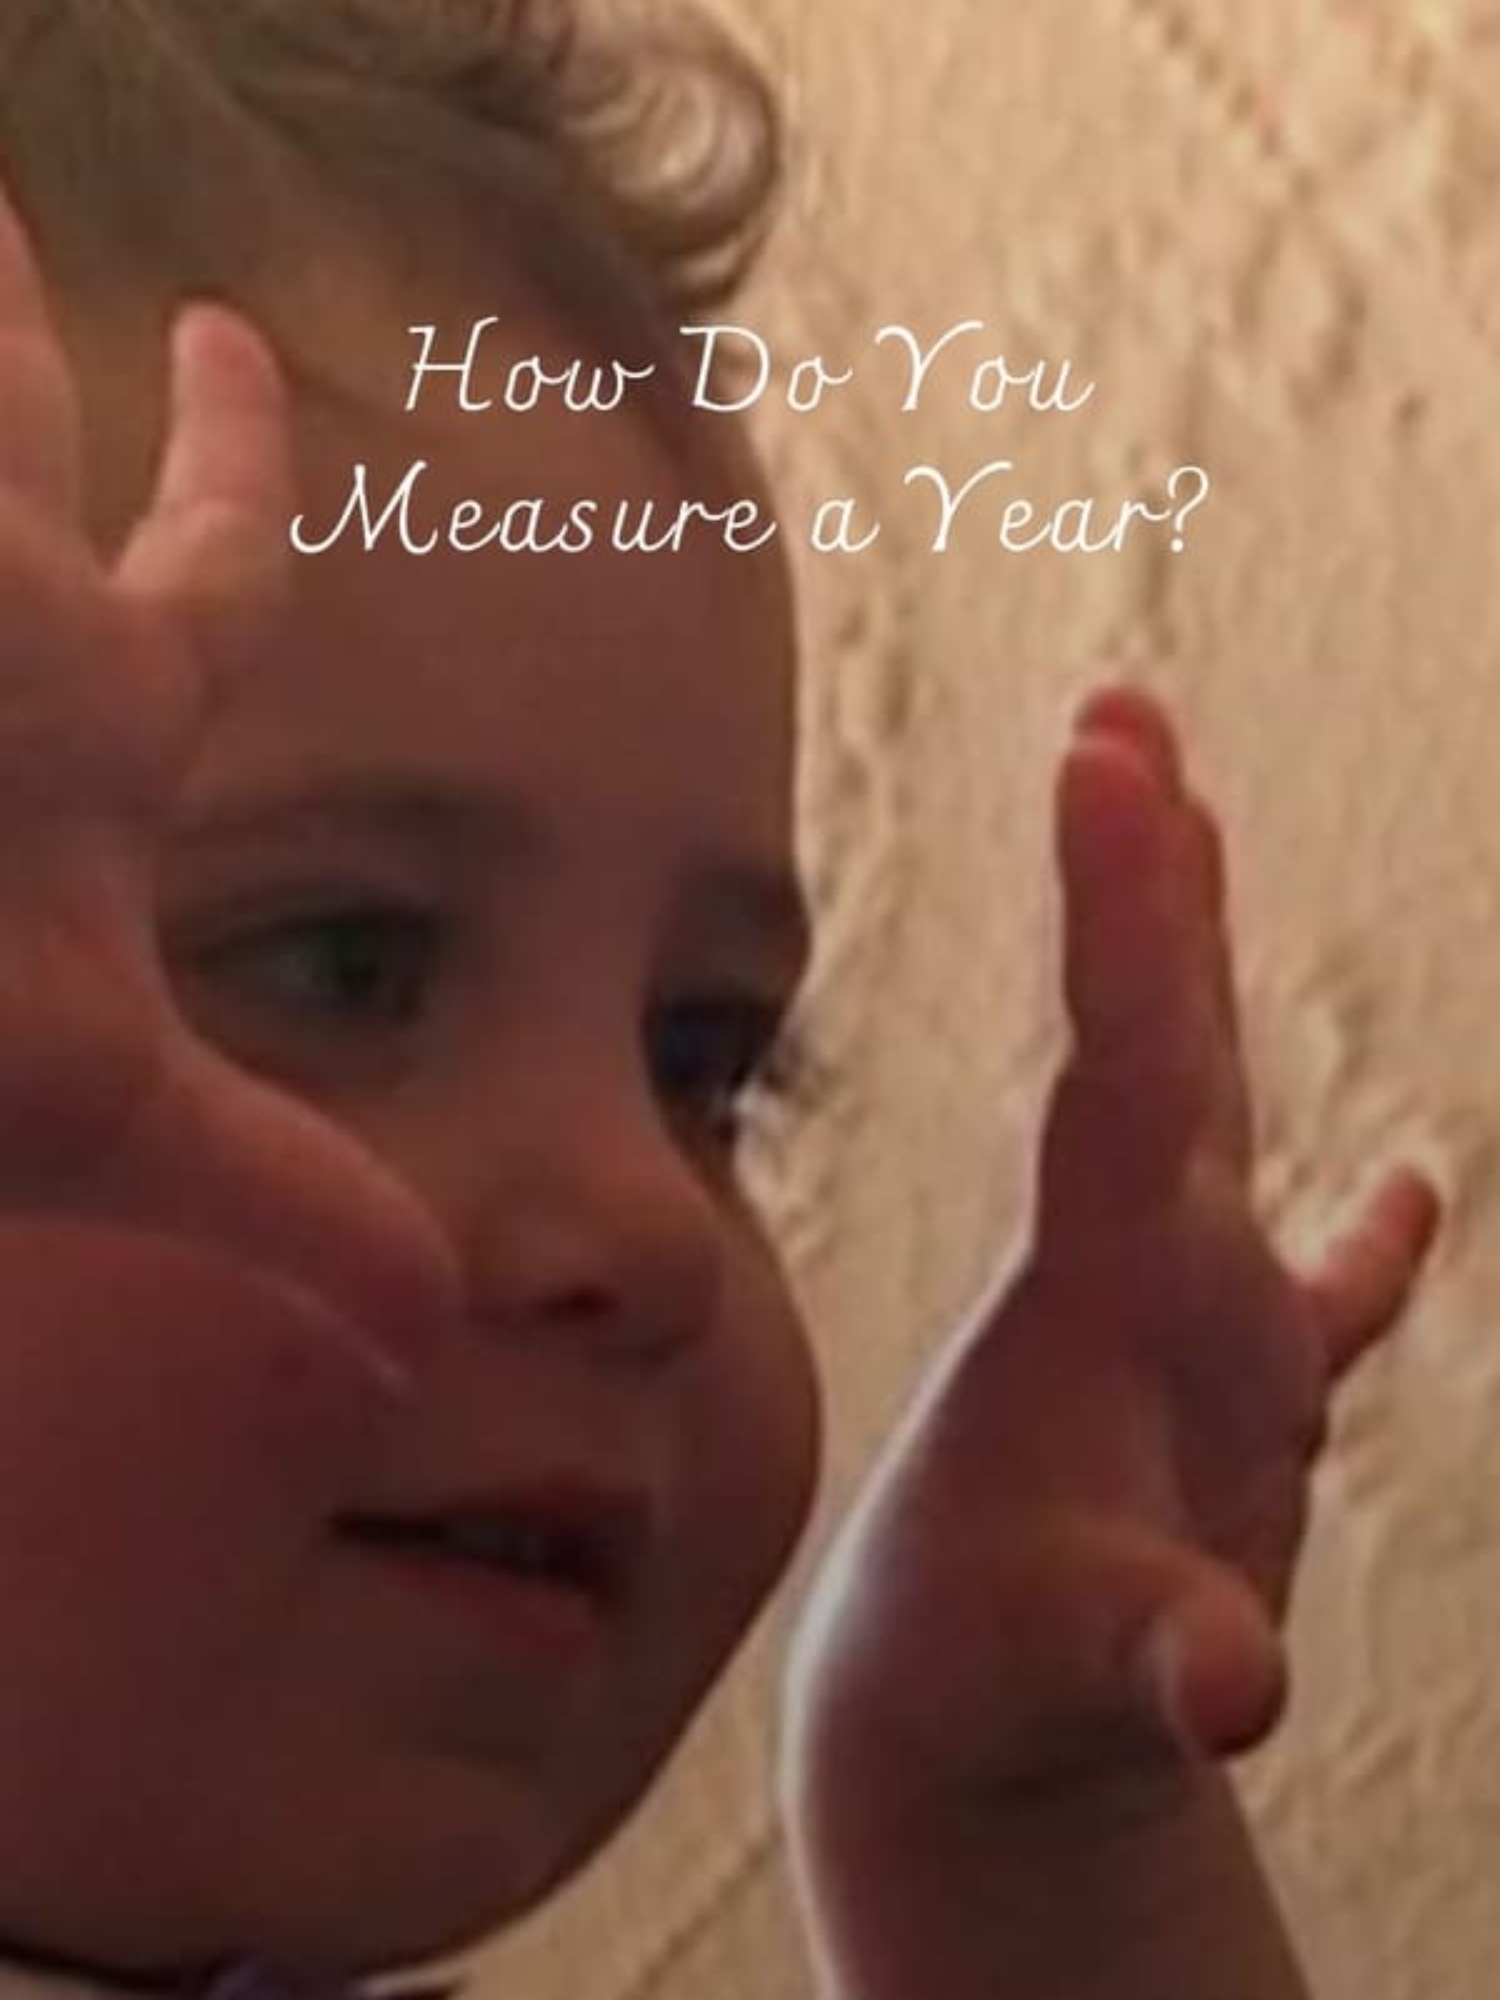 How Do You Measure a Year?